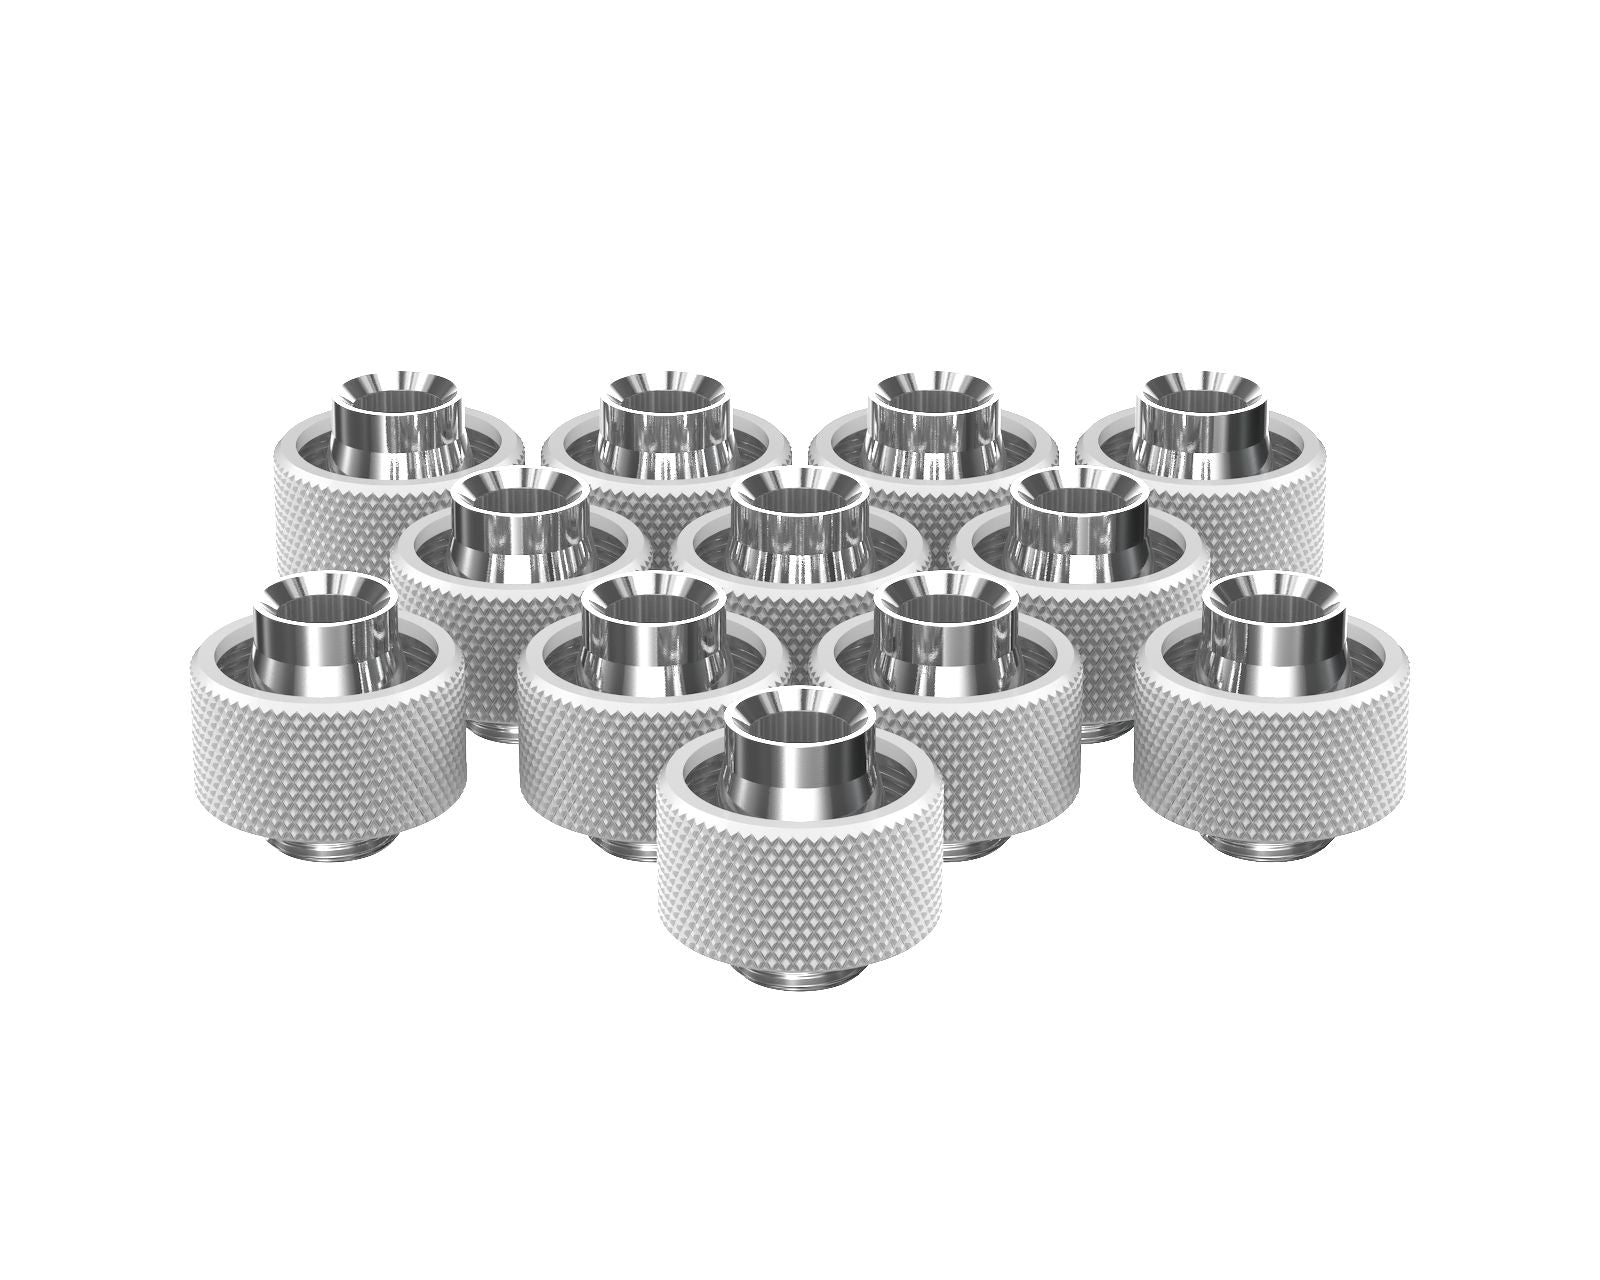 PrimoChill SecureFit SX - Premium Compression Fittings 12 Pack - For 1/2in ID x 3/4in OD Flexible Tubing (F-SFSX34-12) - Available in 20+ Colors, Custom Watercooling Loop Ready - Sky White